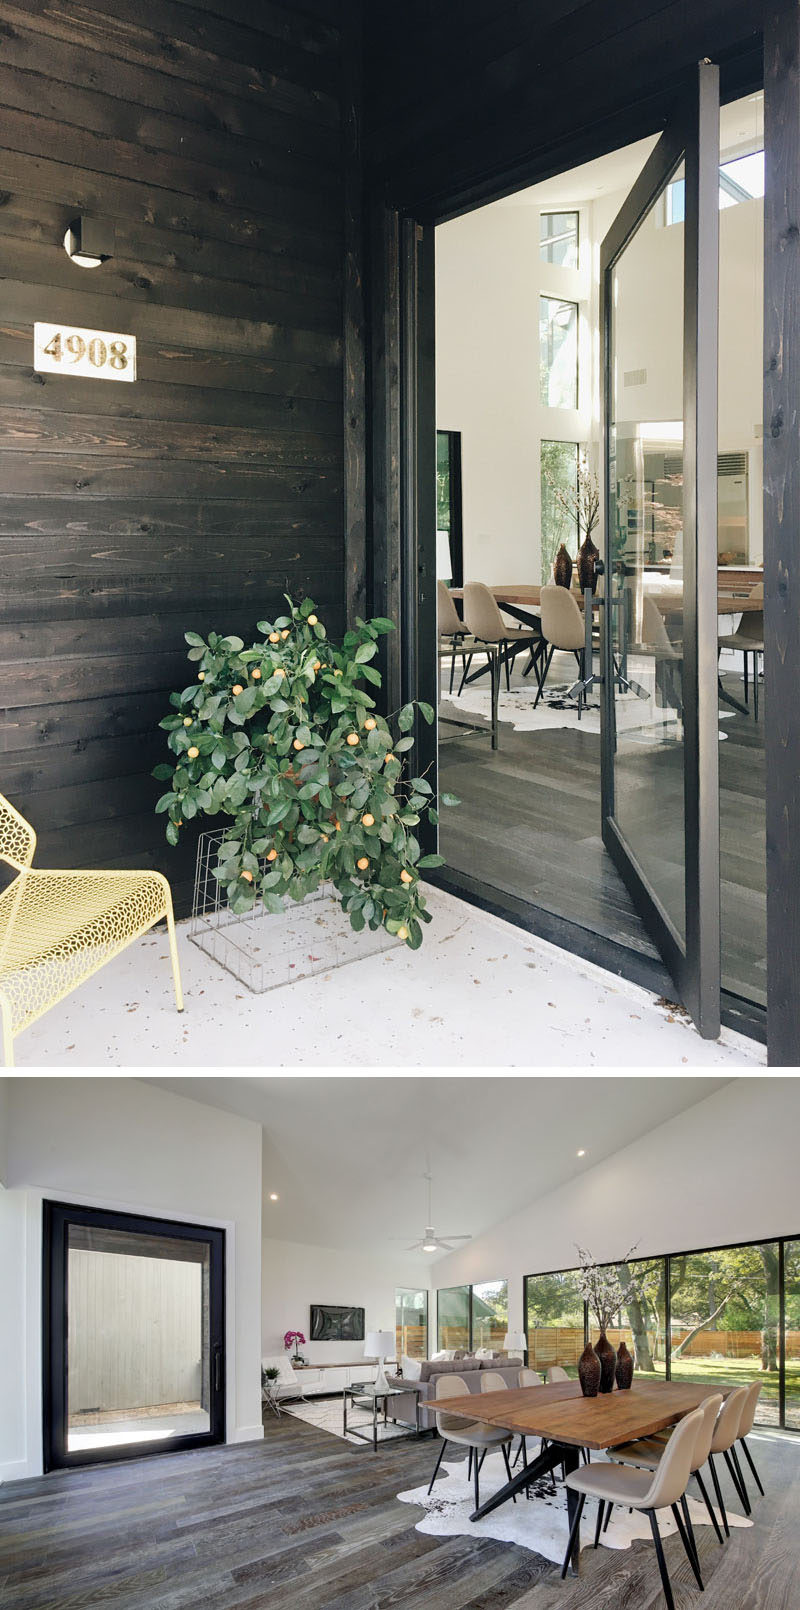 The covered entryway of this modern house leads to the front door, and instead of a more traditional solid wood door, the house has a large pivoting glass door, allowing guests to see into the home or the occupants to see out. #FrontDoor #PivotingGlassDoor #PivotingDoor